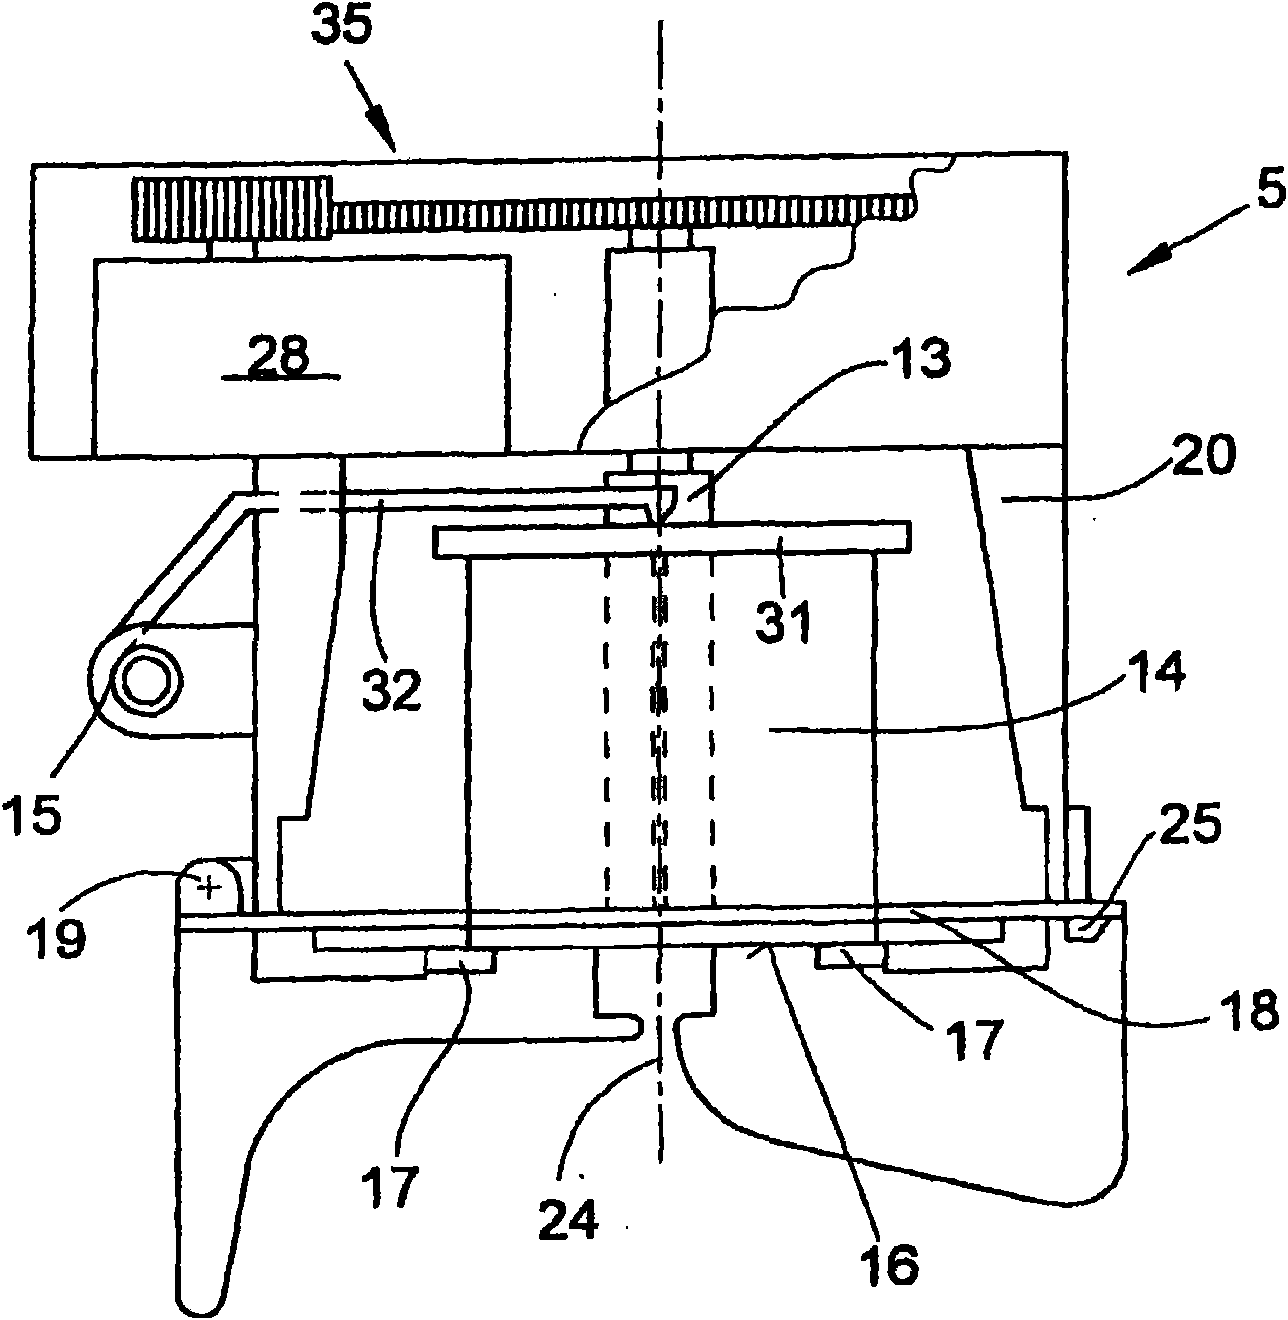 Paraffin-treatment device for a workstation on a textile machine producing cross-wound bobbins